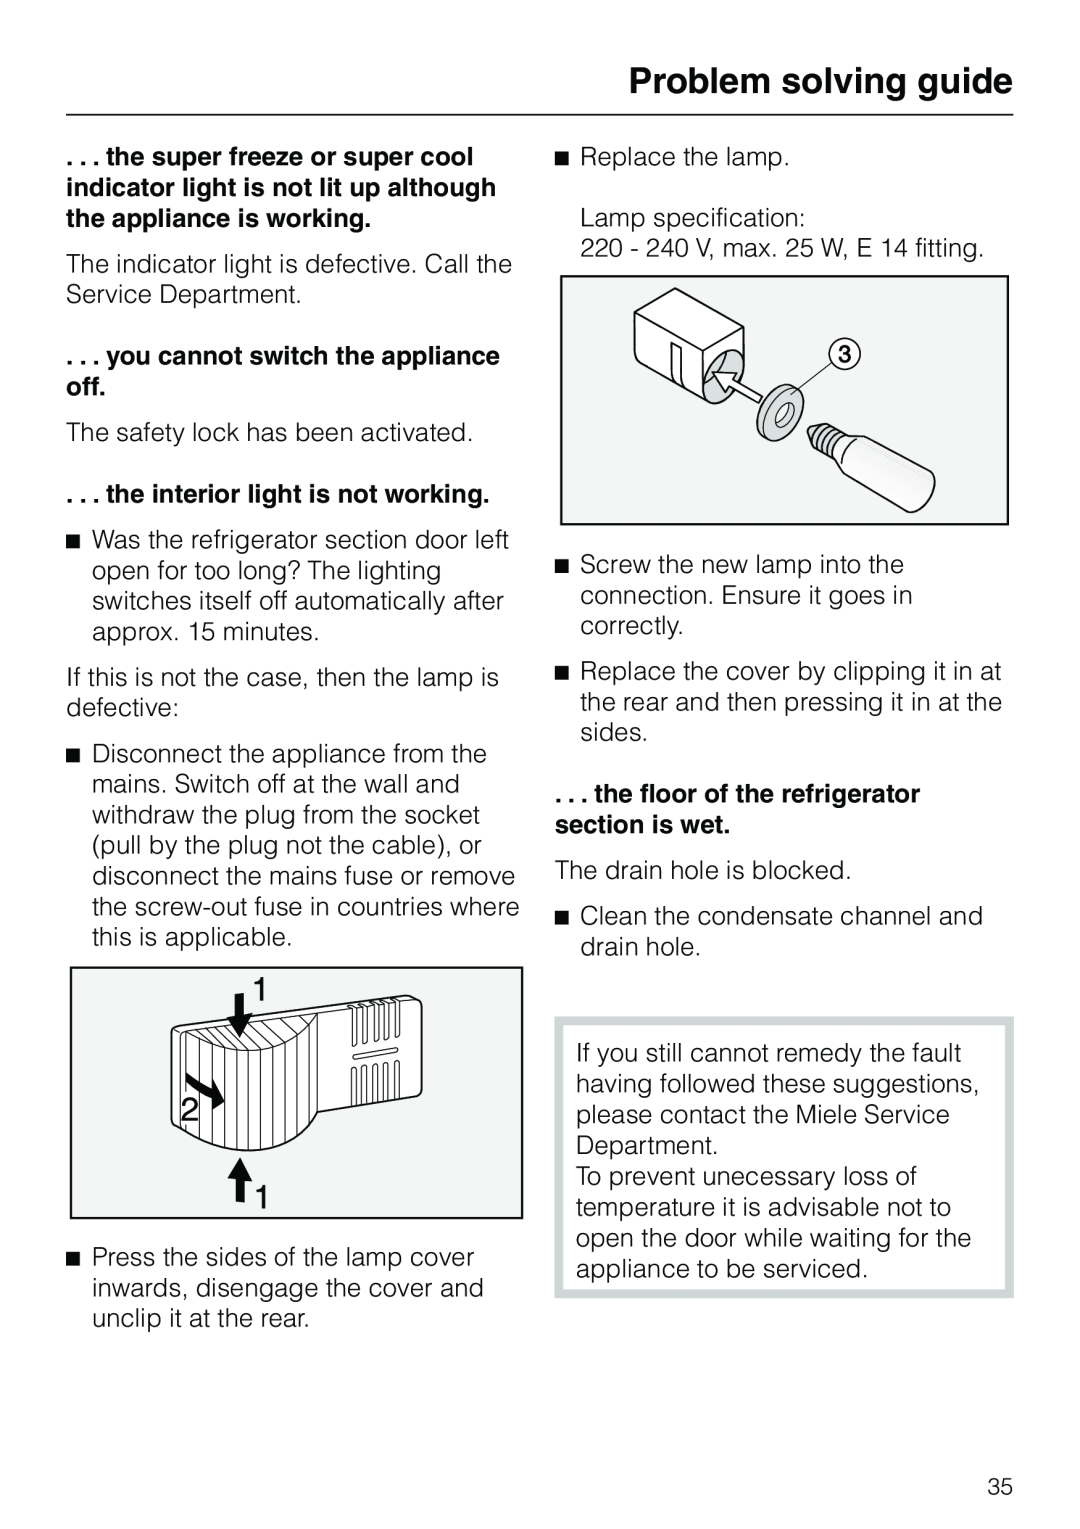 Miele KF 7540 SN you cannot switch the appliance off, the interior light is not working, Problem solving guide 